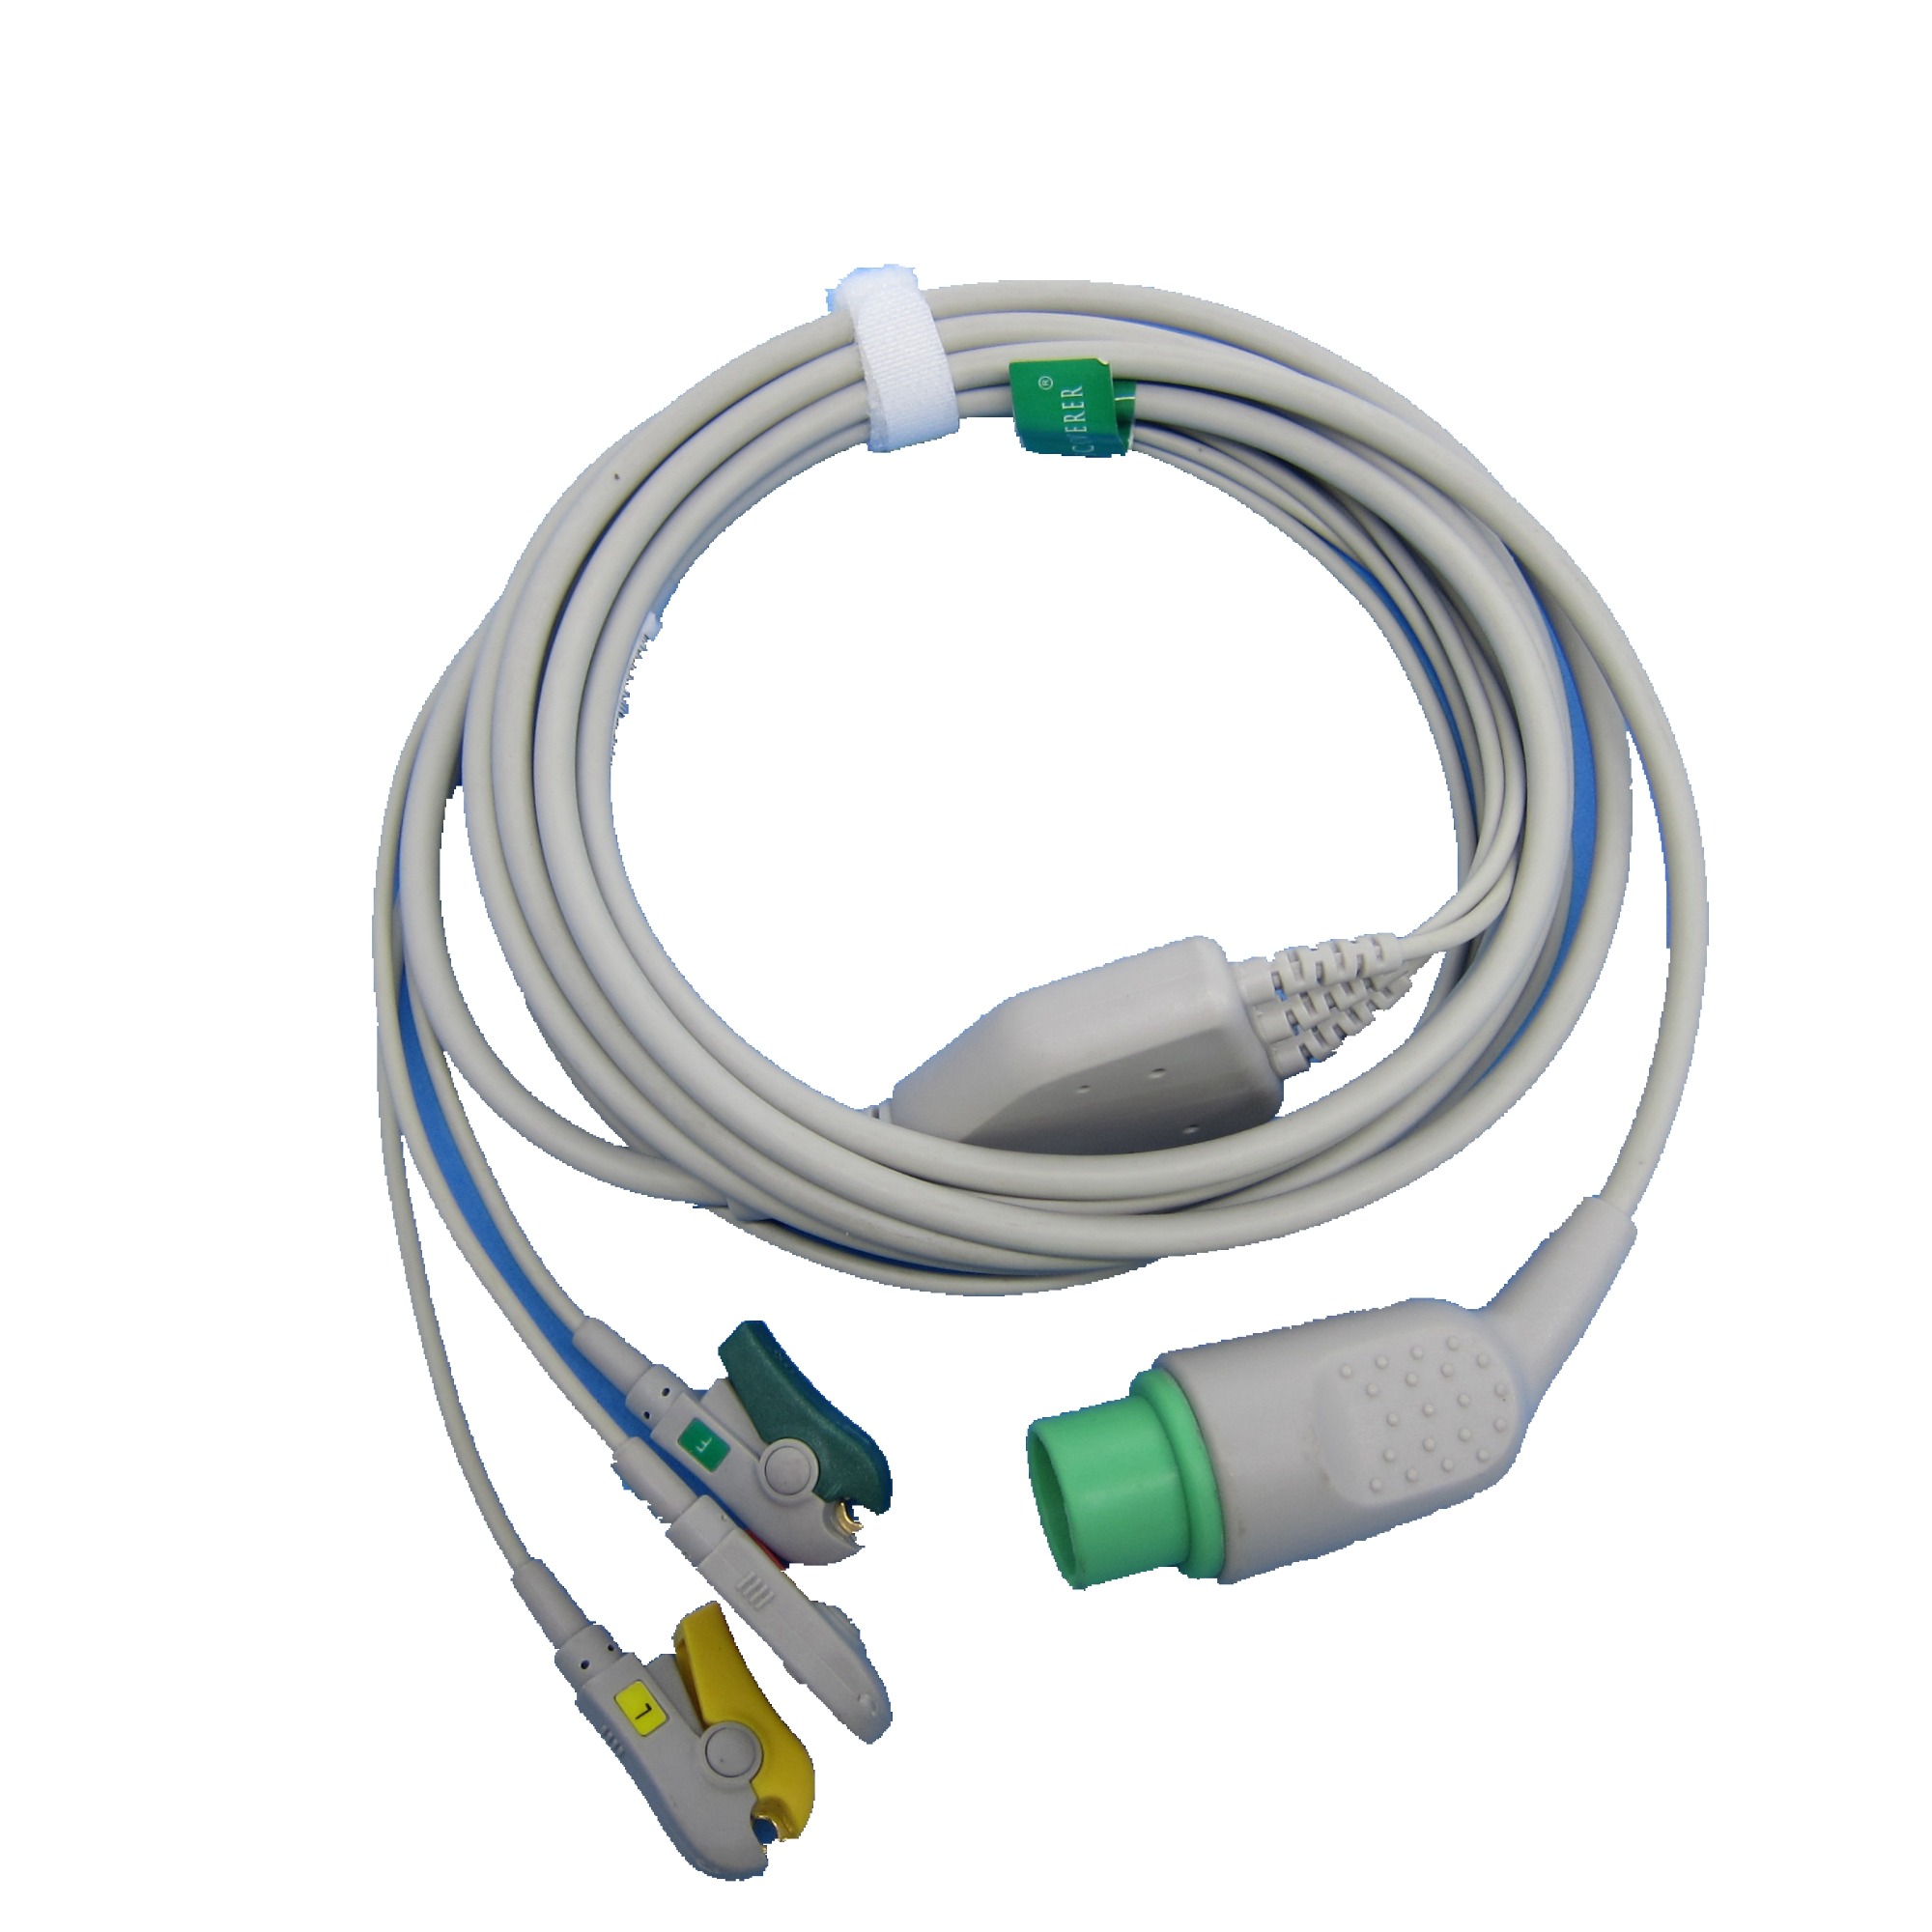 Shiller argus LCM plus One-piece 3 or 5 Leads Snap Or Clip ECG cable and leadwires for ECG machine